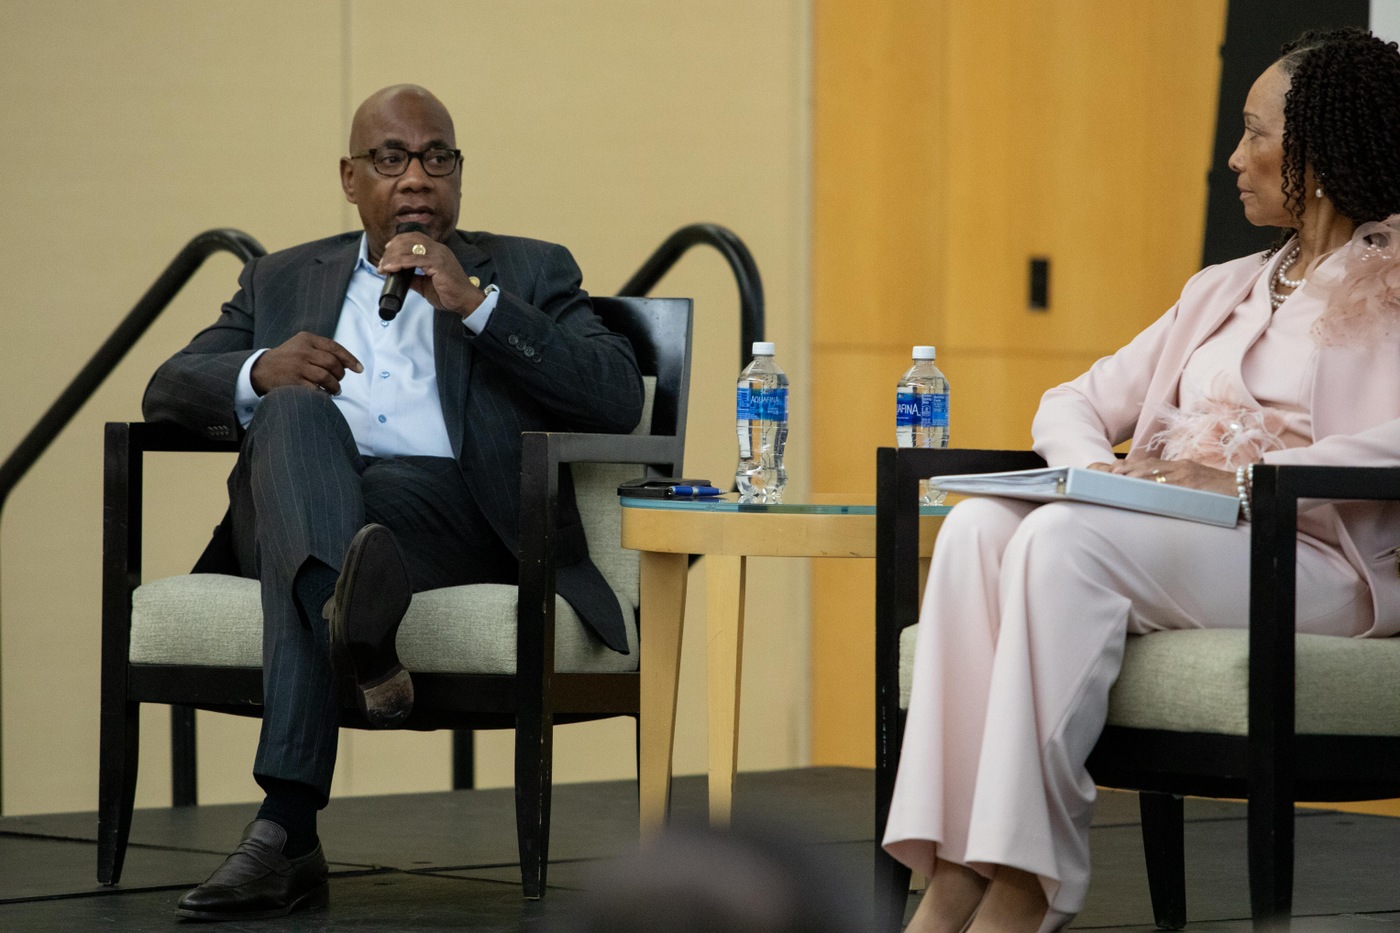 Dr. David Wilson, president of Morgan State University; Cynthia Snyder, assistant director of national intelligence for human capital at the Office of the Director of National Intelligence at 2023 Beacon Conference in Baltimore.